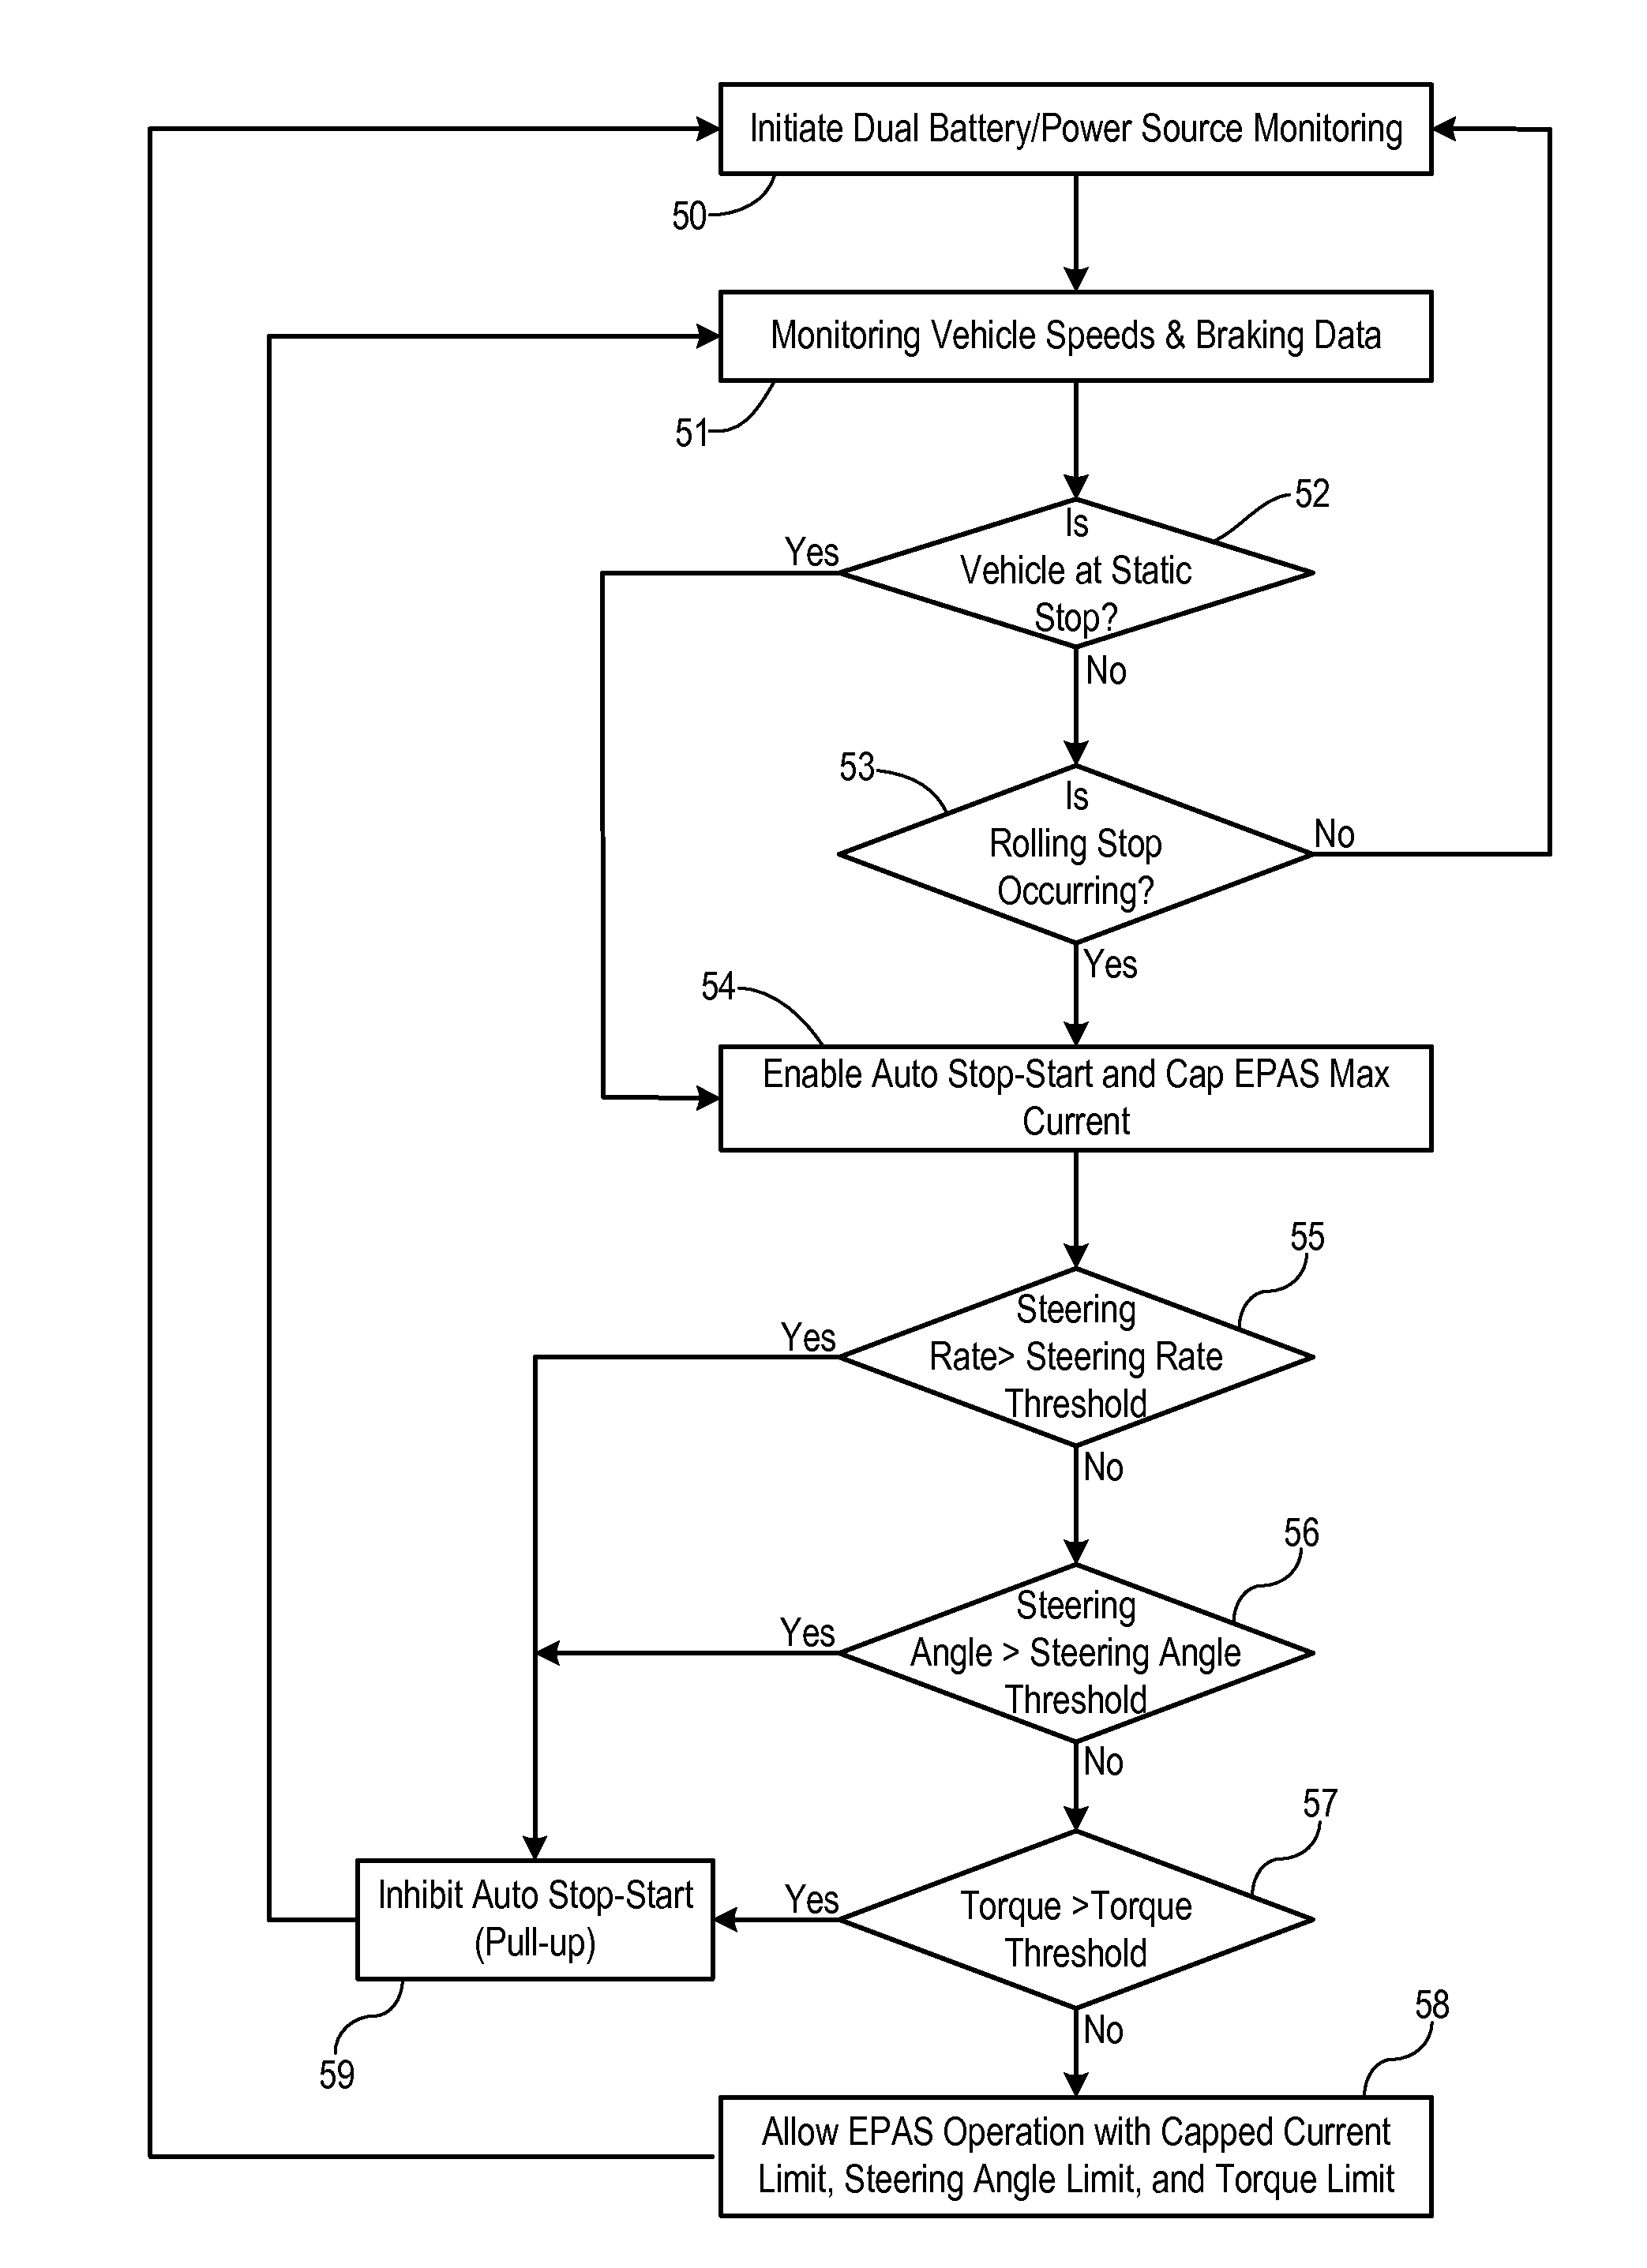 Apparatus and method to maximize vehicle functionality and fuel economy with improved drivability during engine auto stop-start operations